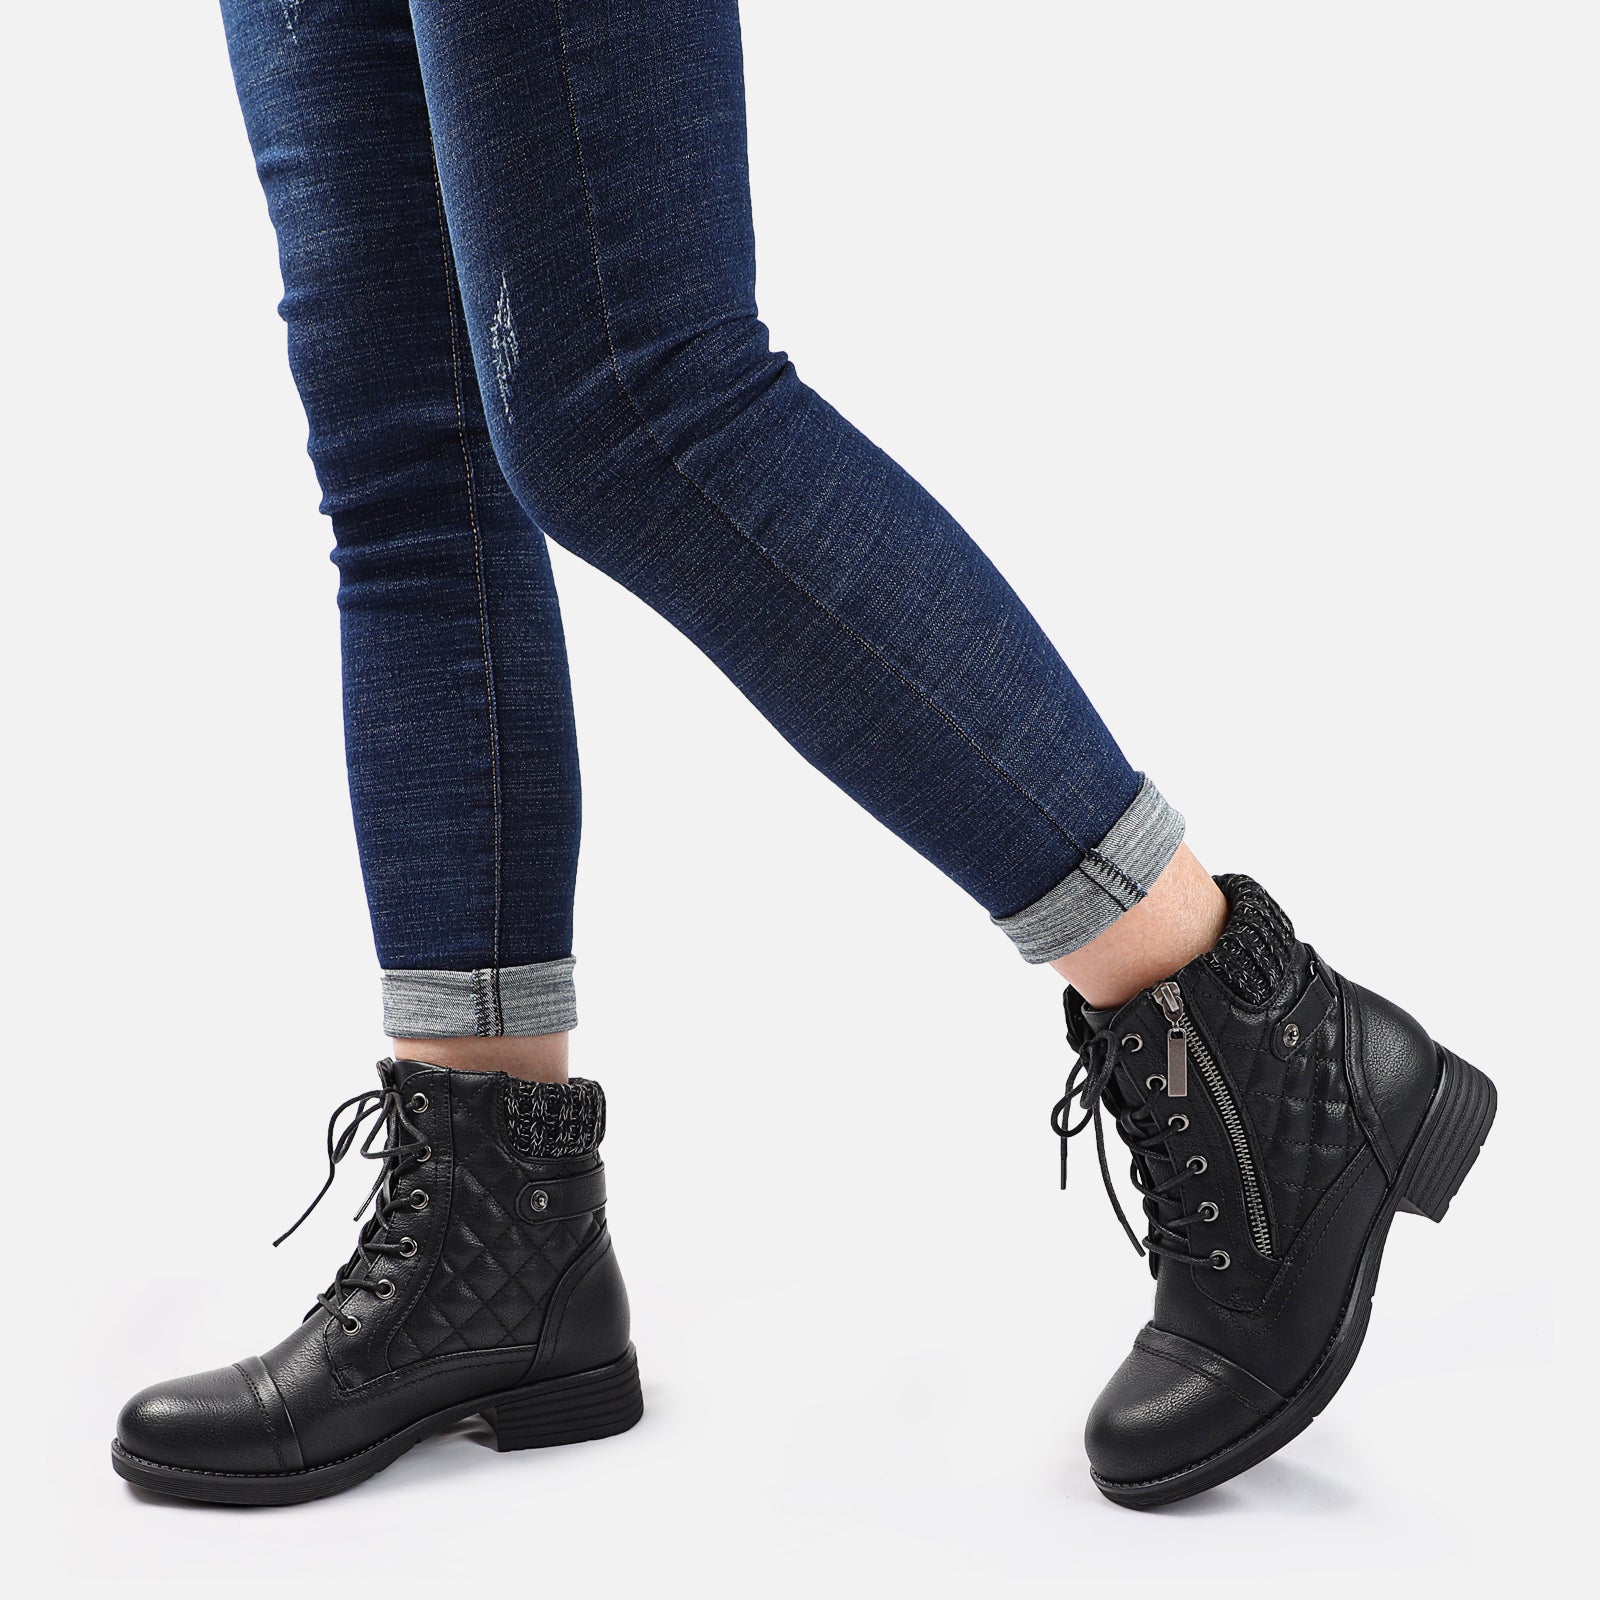 stq-womens-combat-boots-ankle-booties-product-view